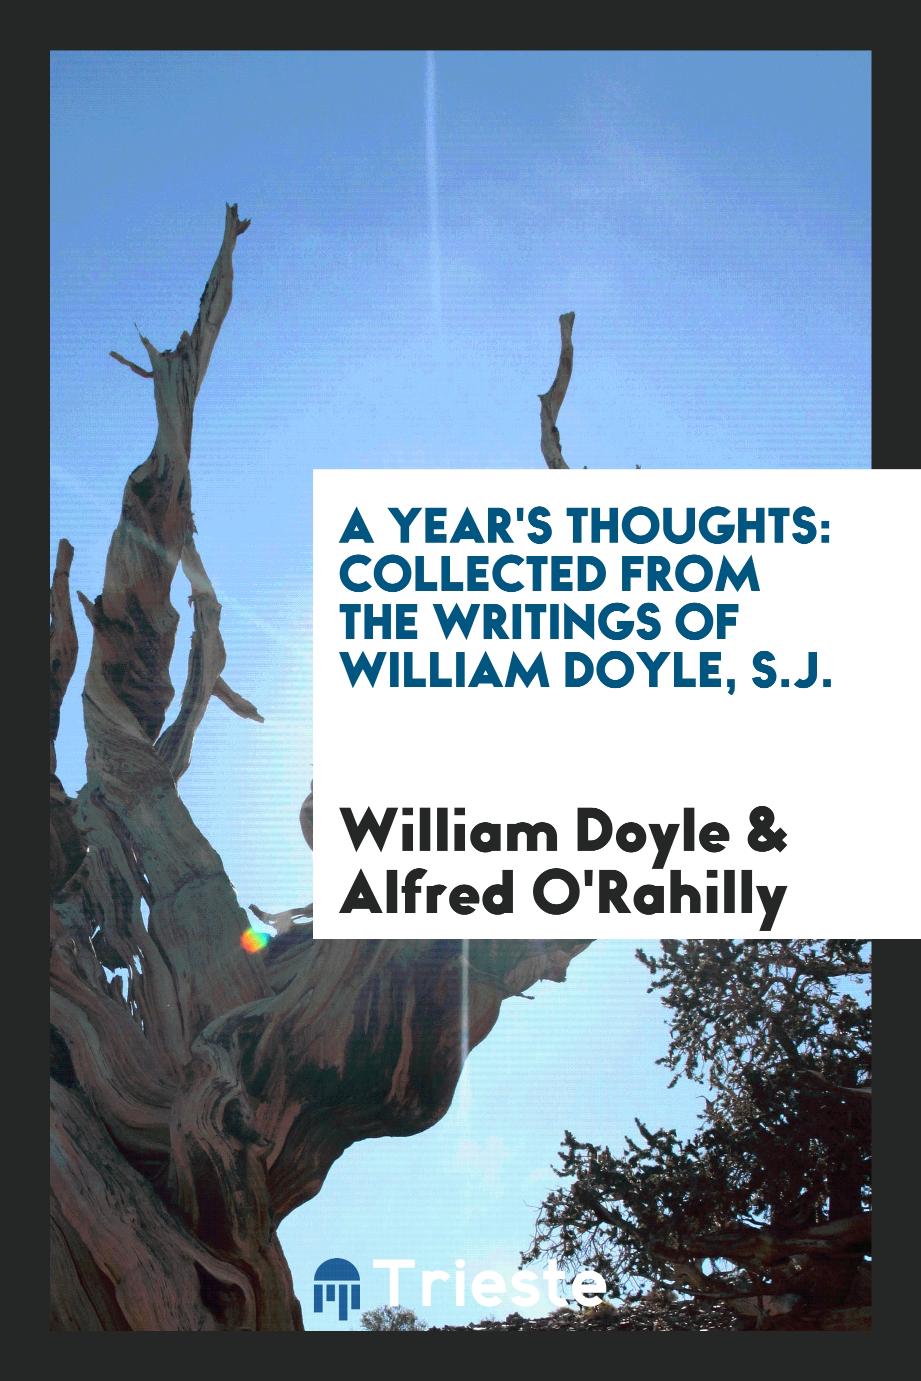 A Year's Thoughts: Collected from the Writings of William Doyle, S.J.